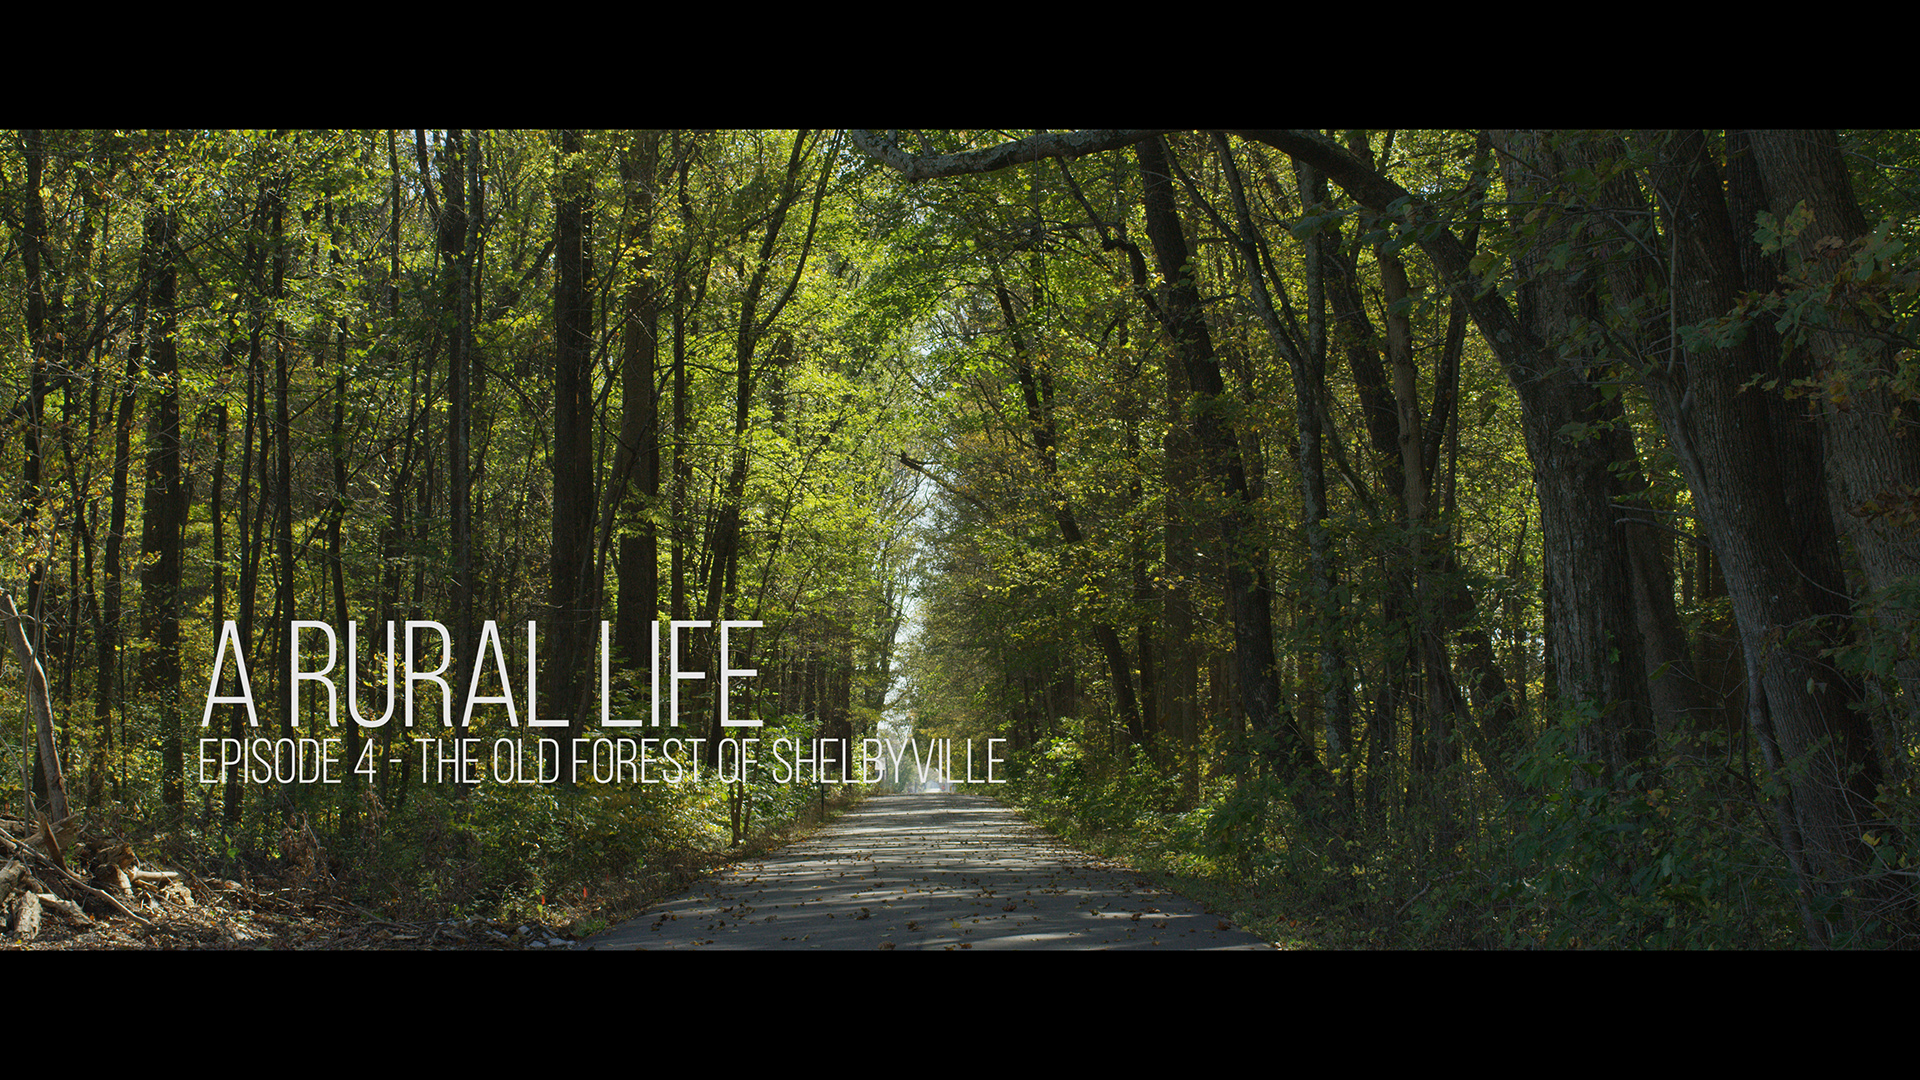 A Rural Life Episode 4 The Old Forest of Shelbyville Poster 1080.jpg